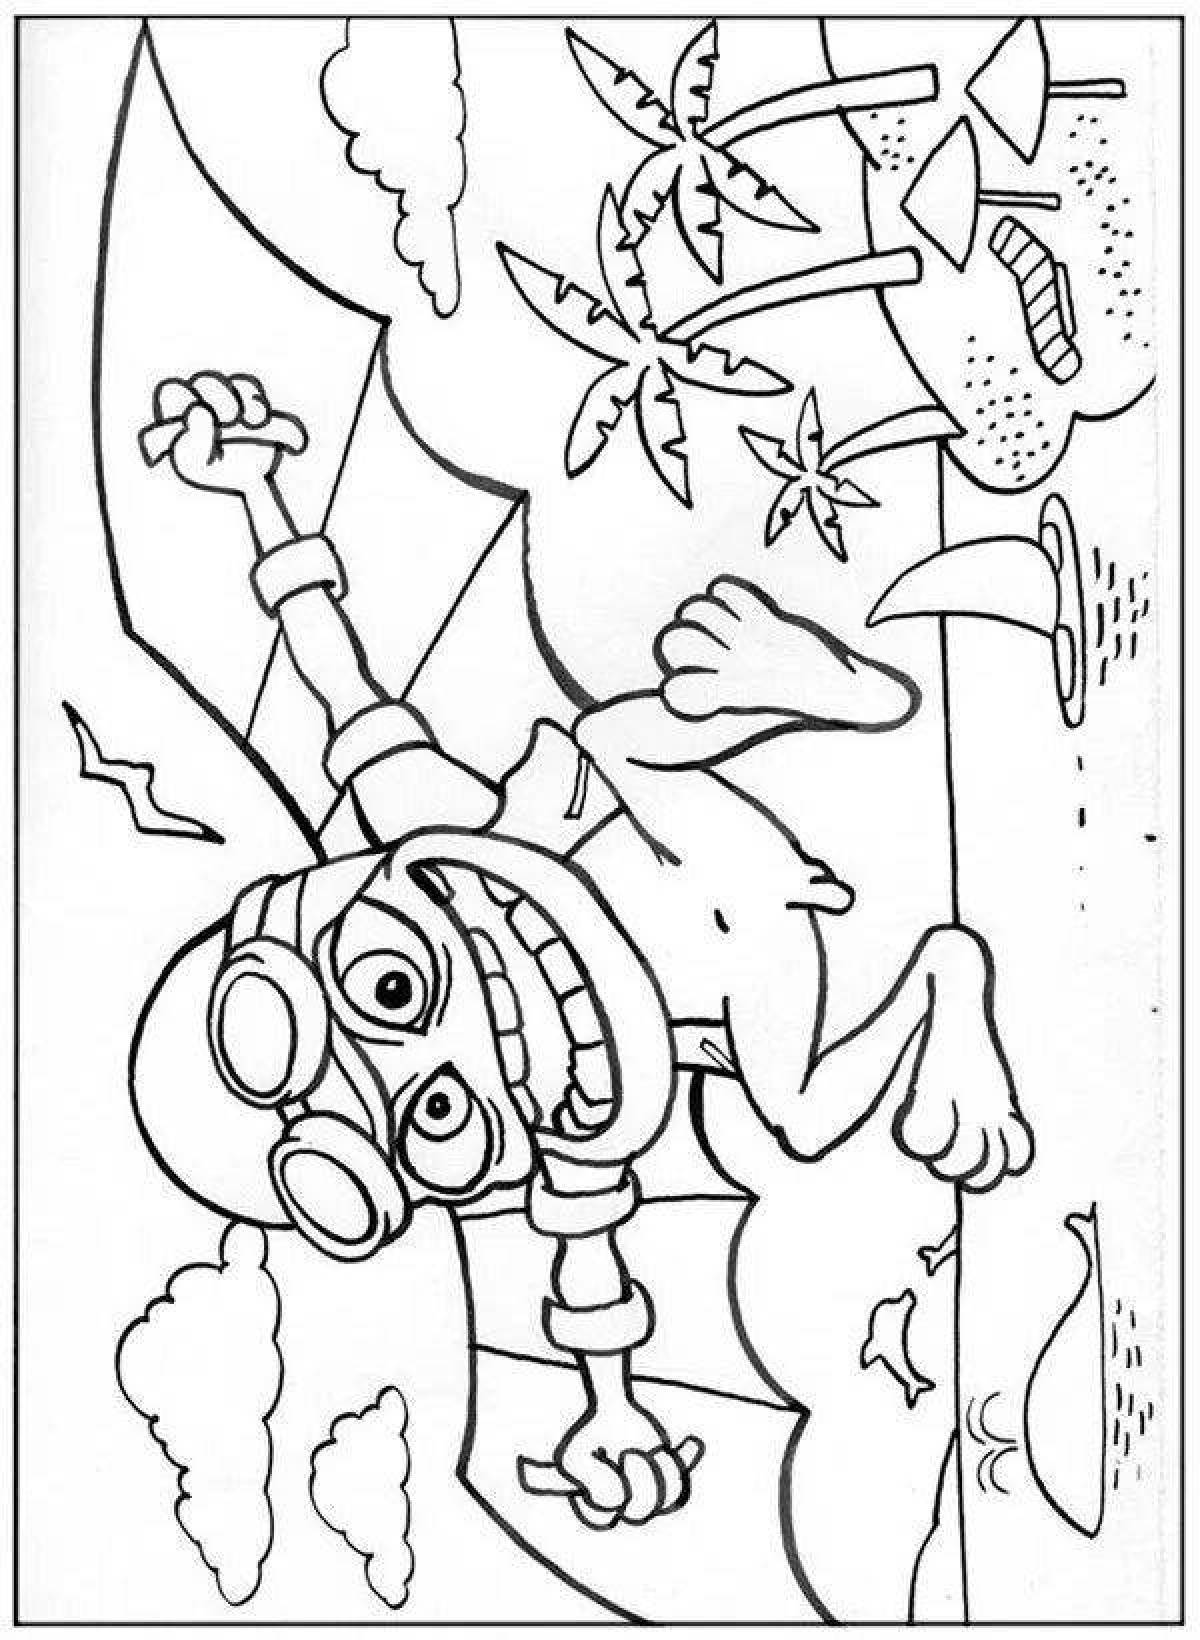 Funny crazy frog coloring book